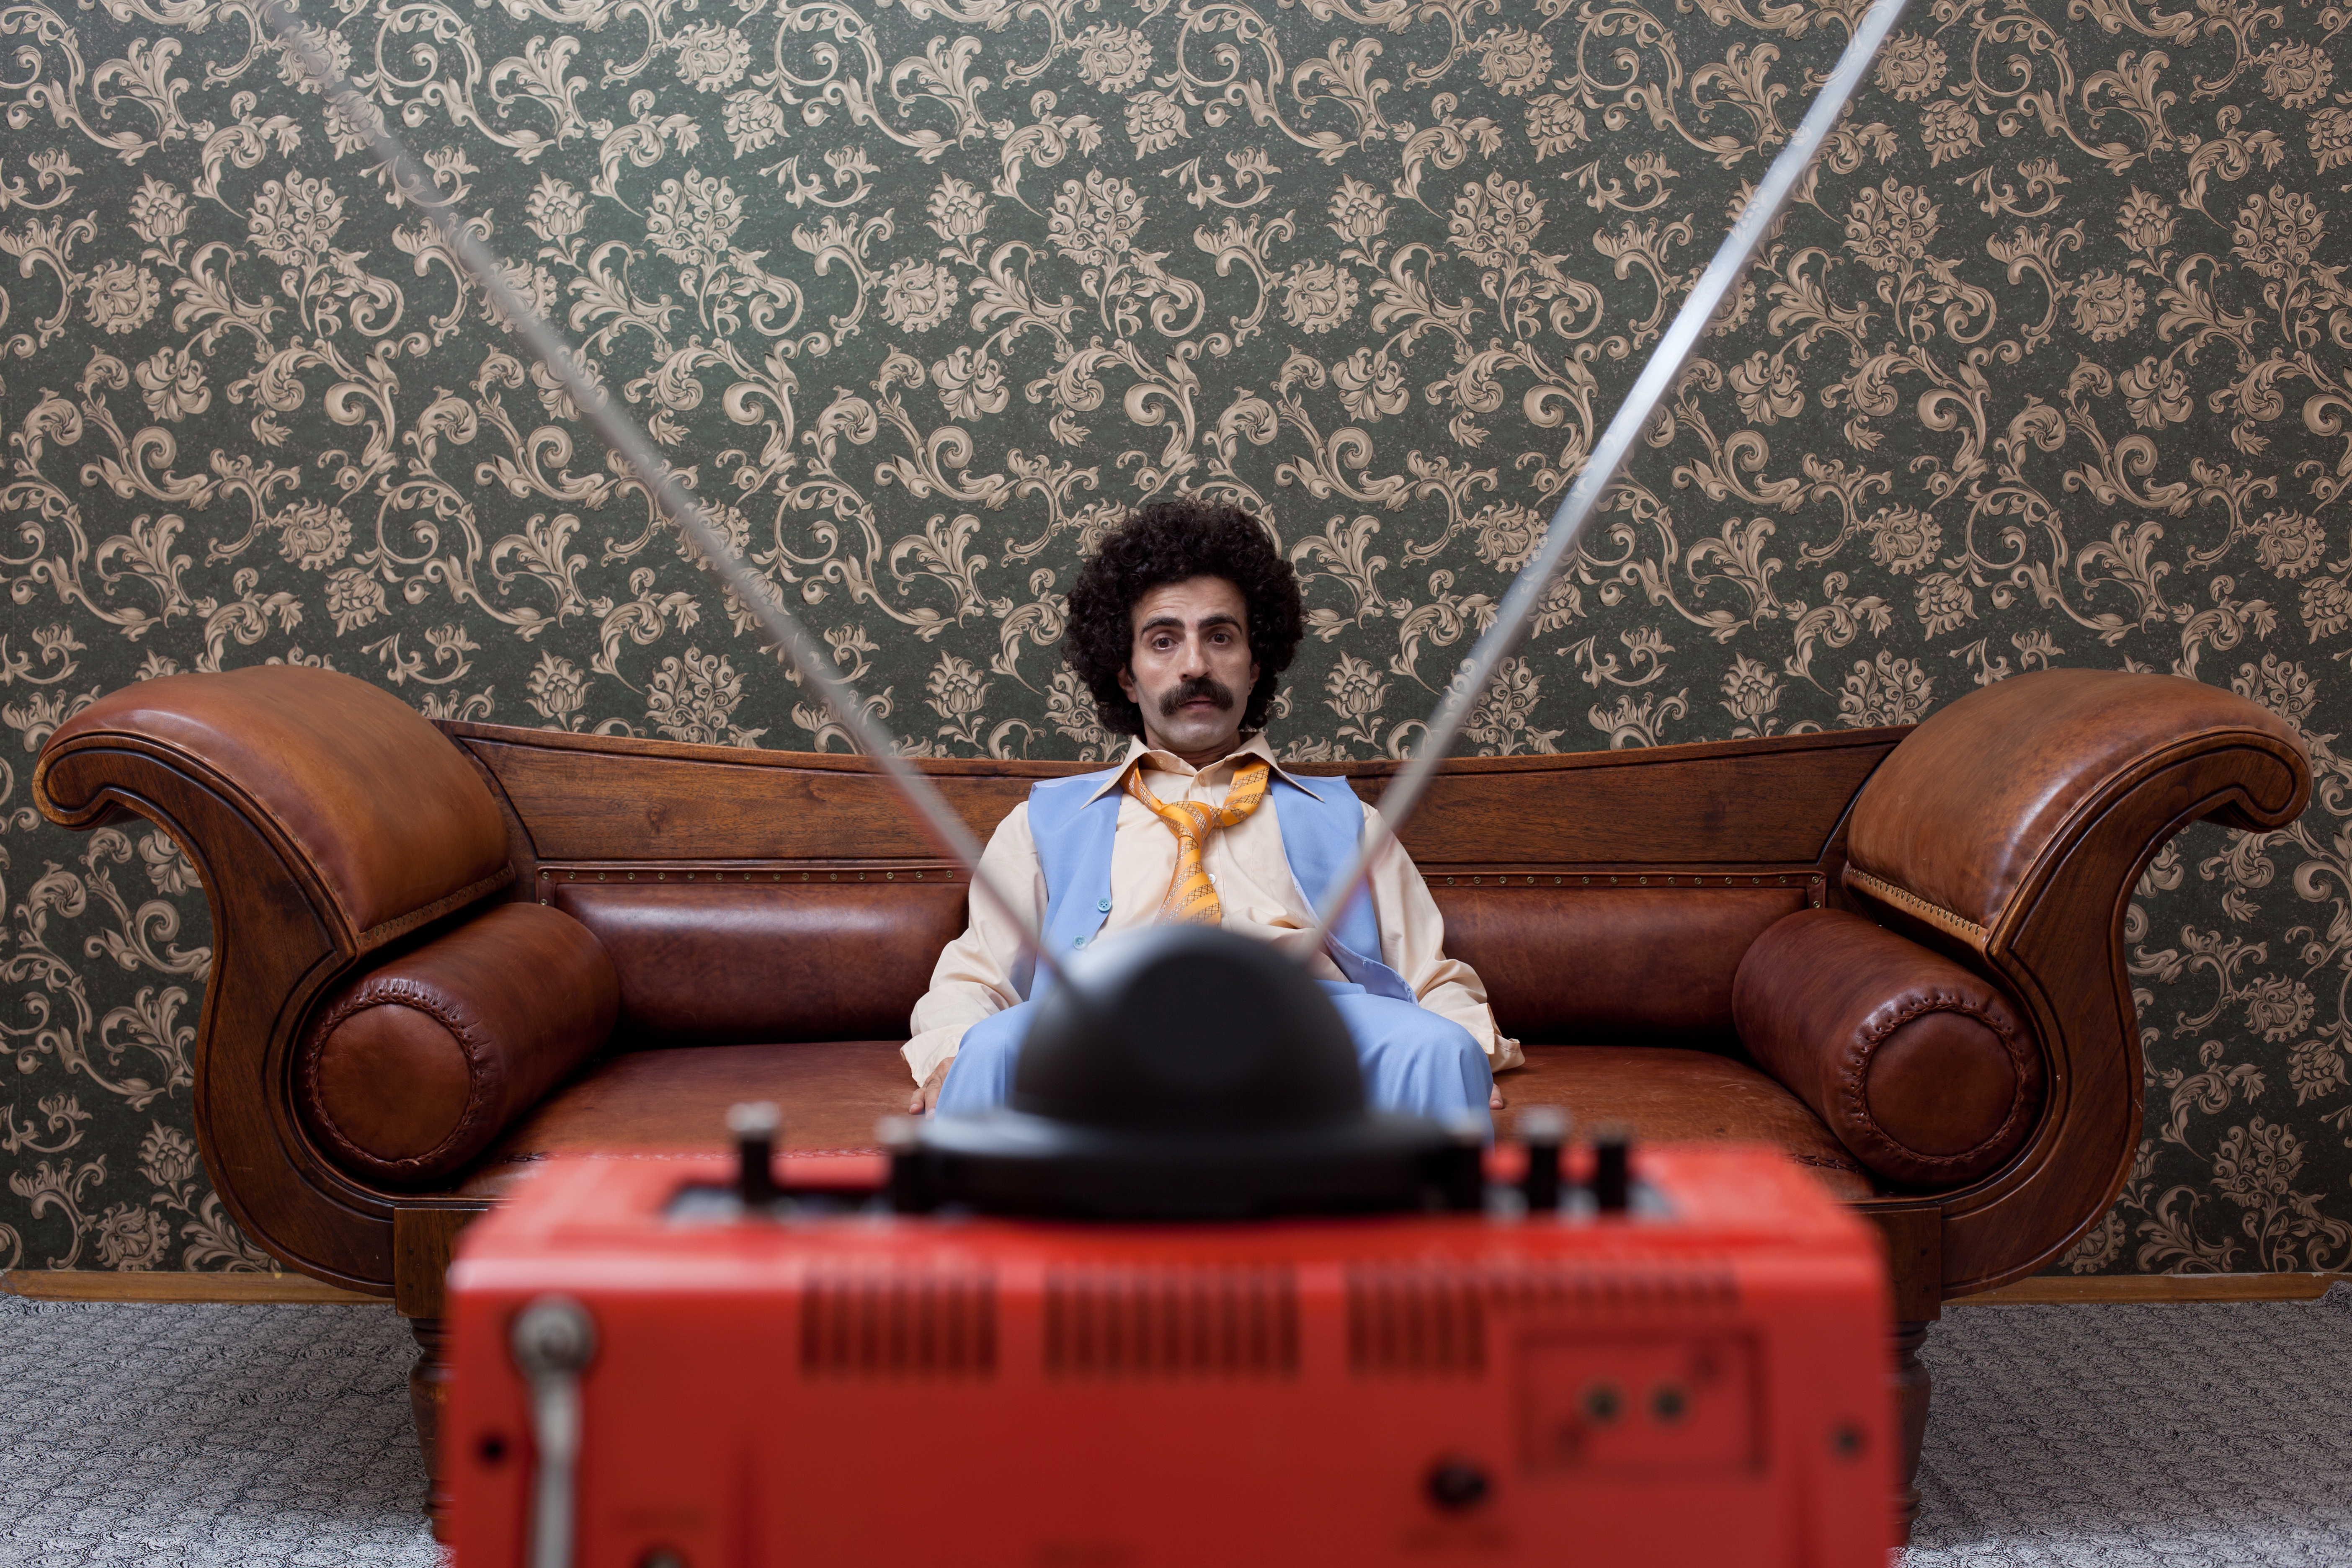 A man sitting in a '70s style living room and watching television. | Source: Getty Images